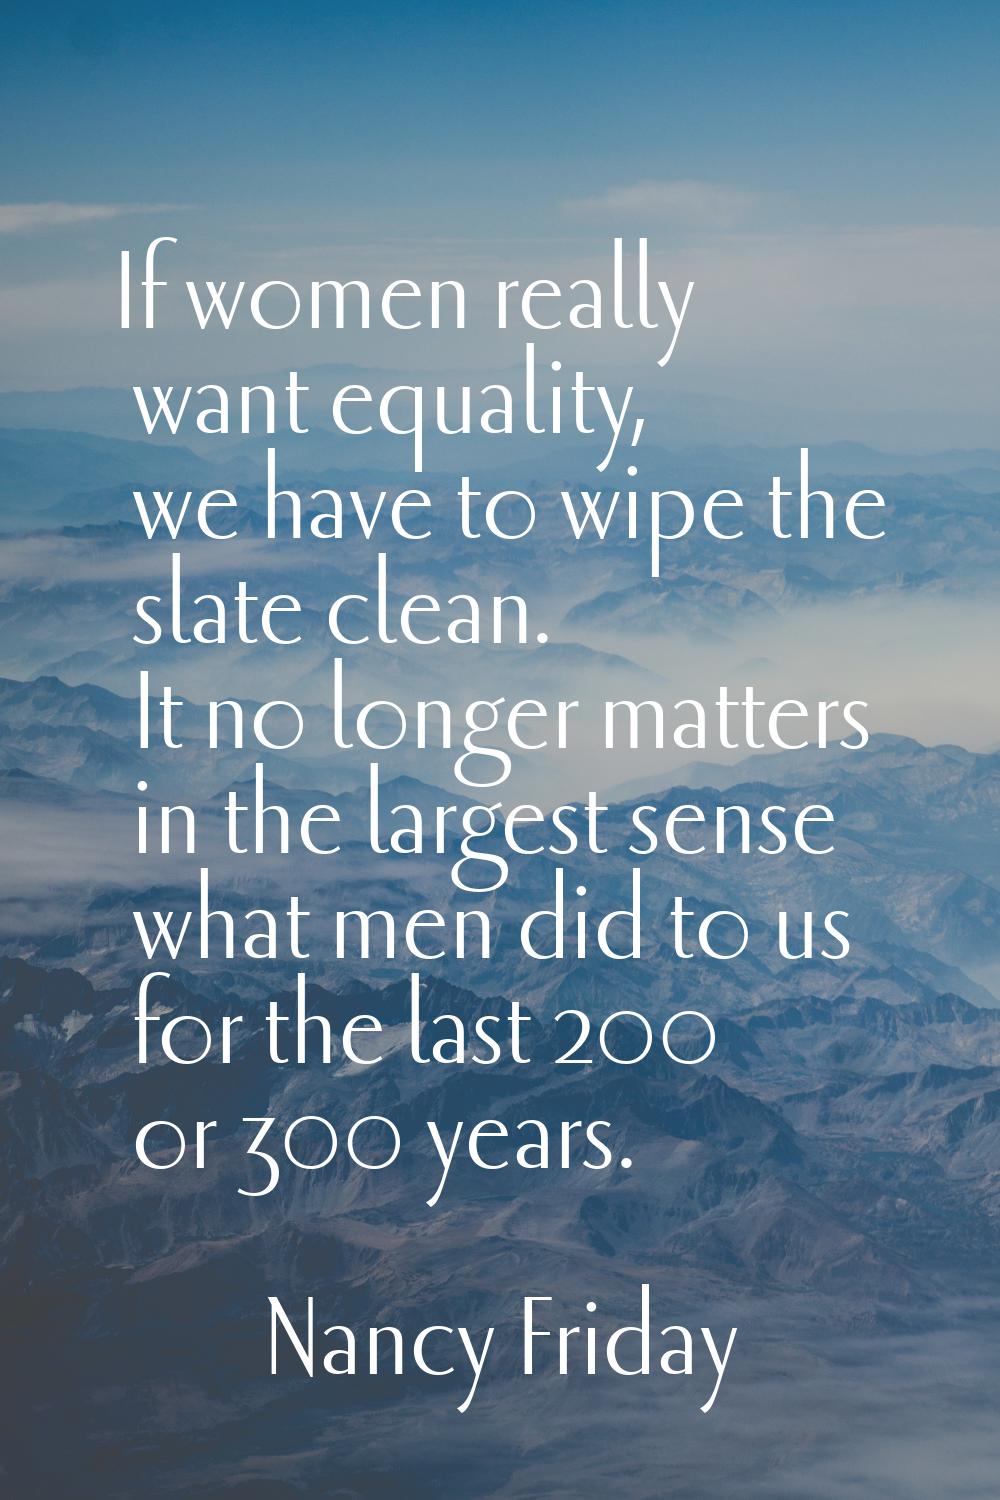 If women really want equality, we have to wipe the slate clean. It no longer matters in the largest